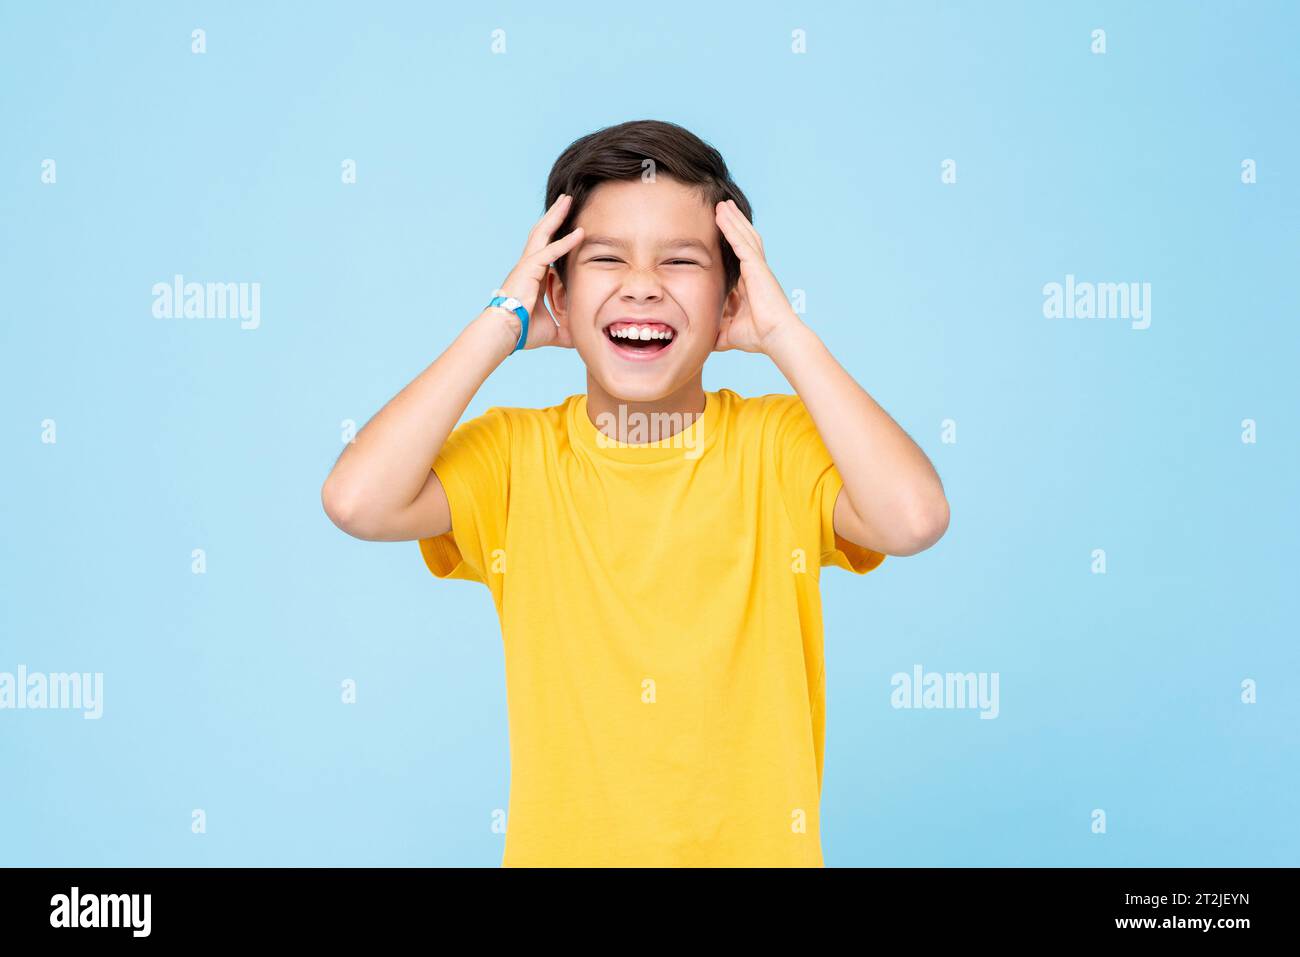 Excited mixed race boy in yellow t shirt touching head and laughing out loud against blue background Stock Photo